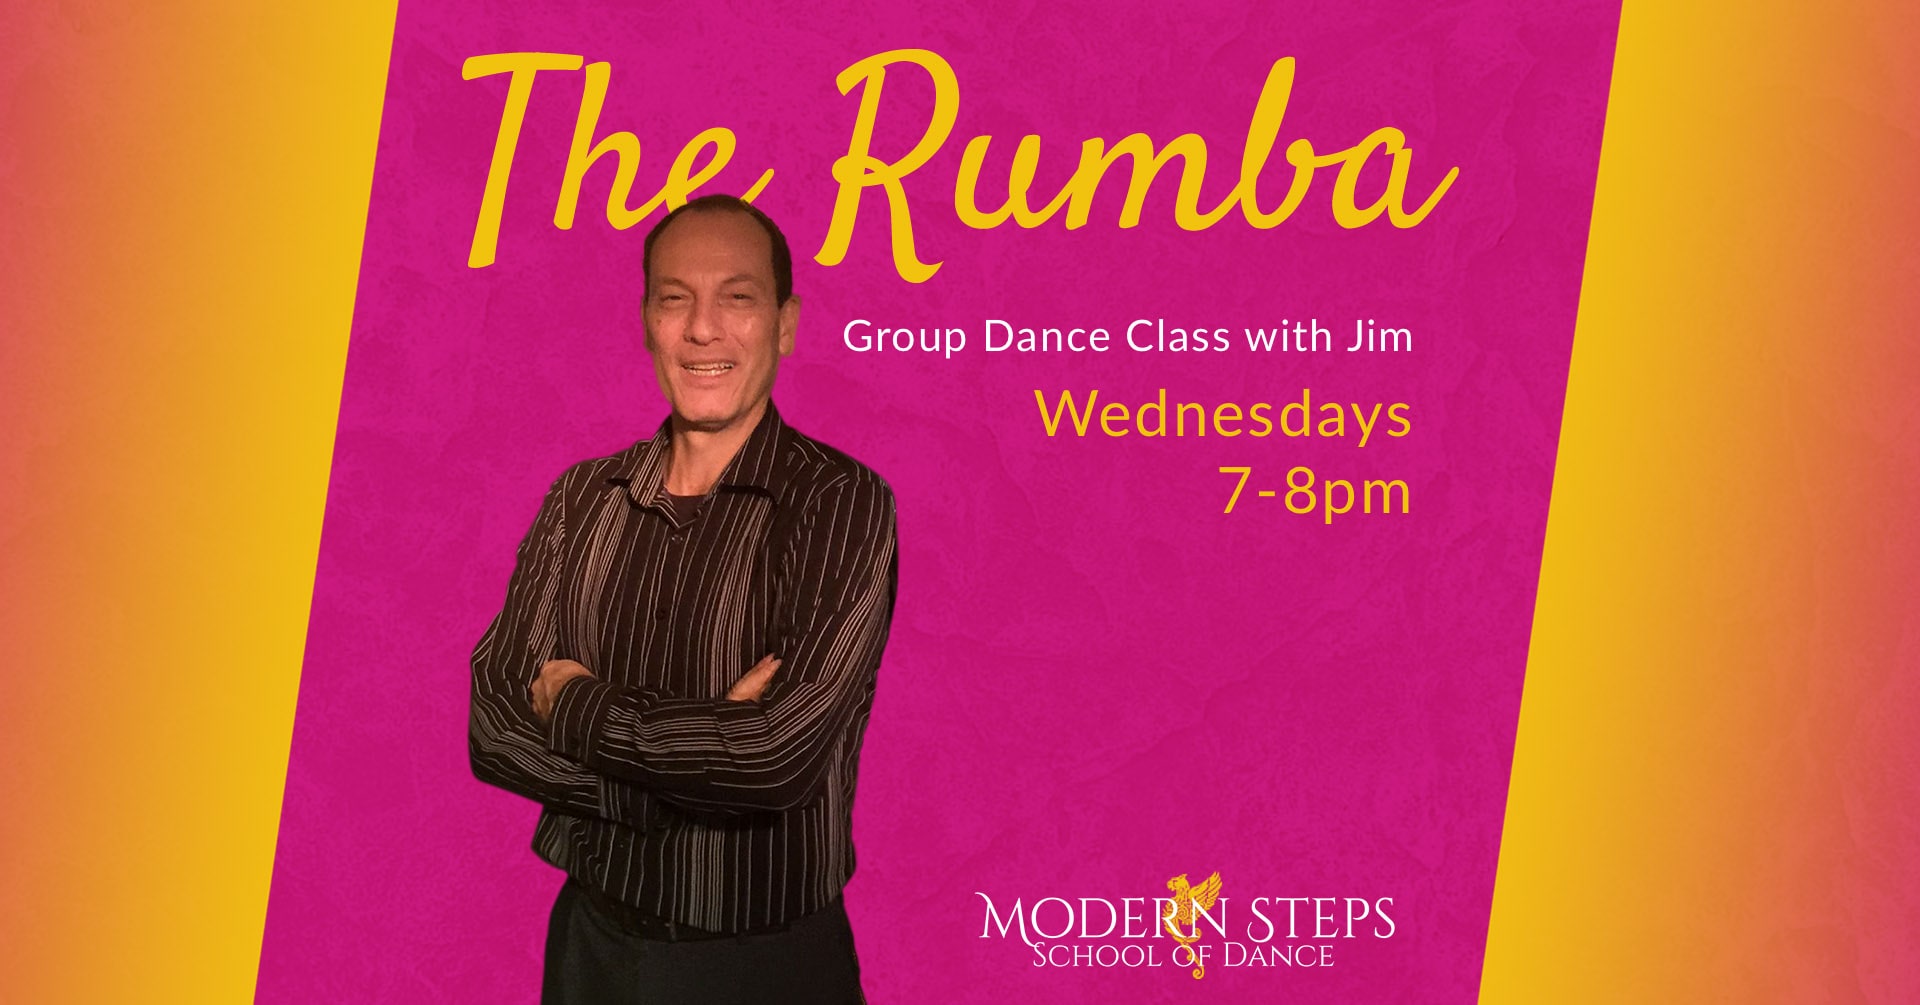 Modern Steps School of Dance Naples Florida The Rumba Dance Classes - Group Ballroom Dance Lessons - Naples Florida Things to Do